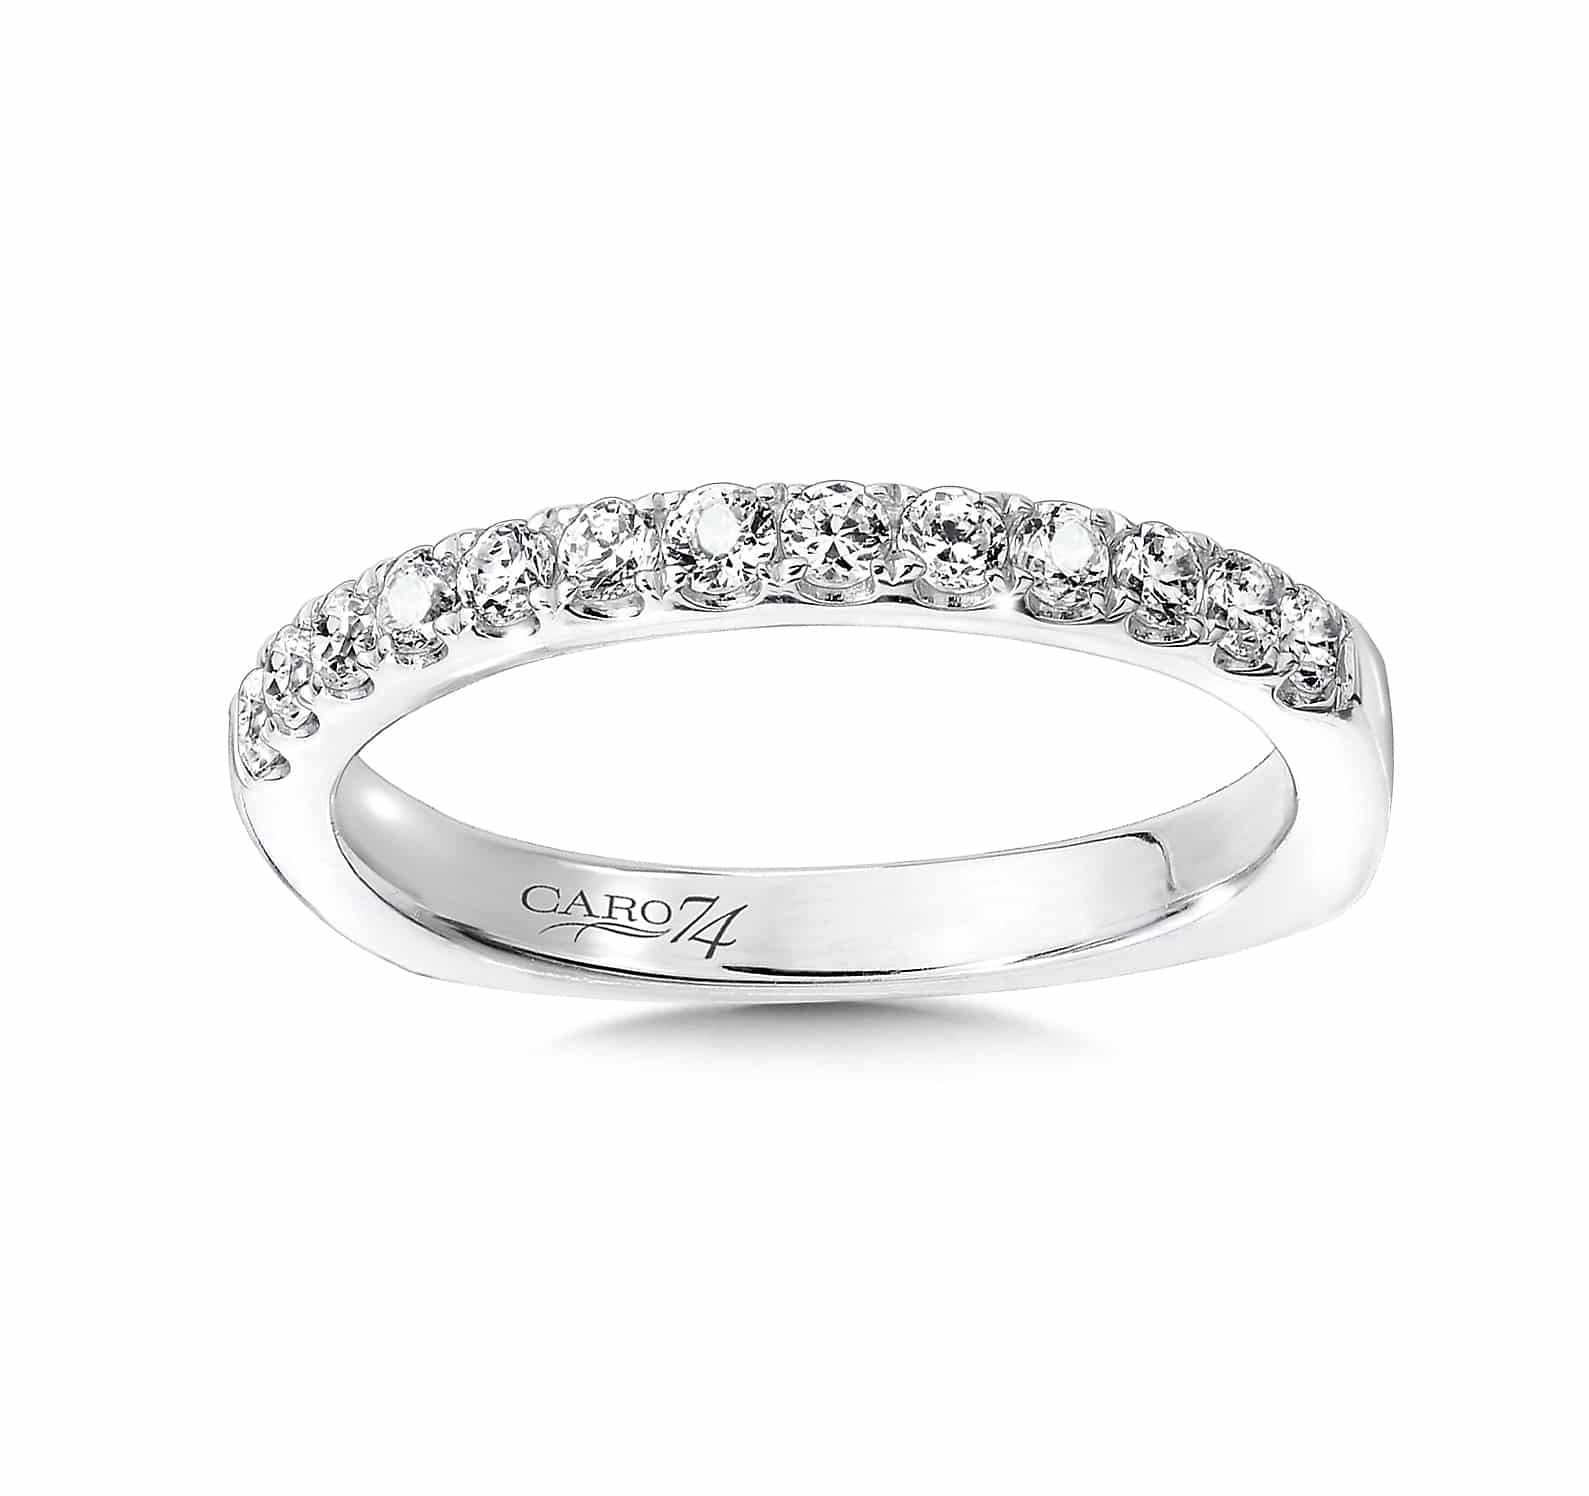 Wholesale Wedding Bands - Wholesale Jewelry in Frisco